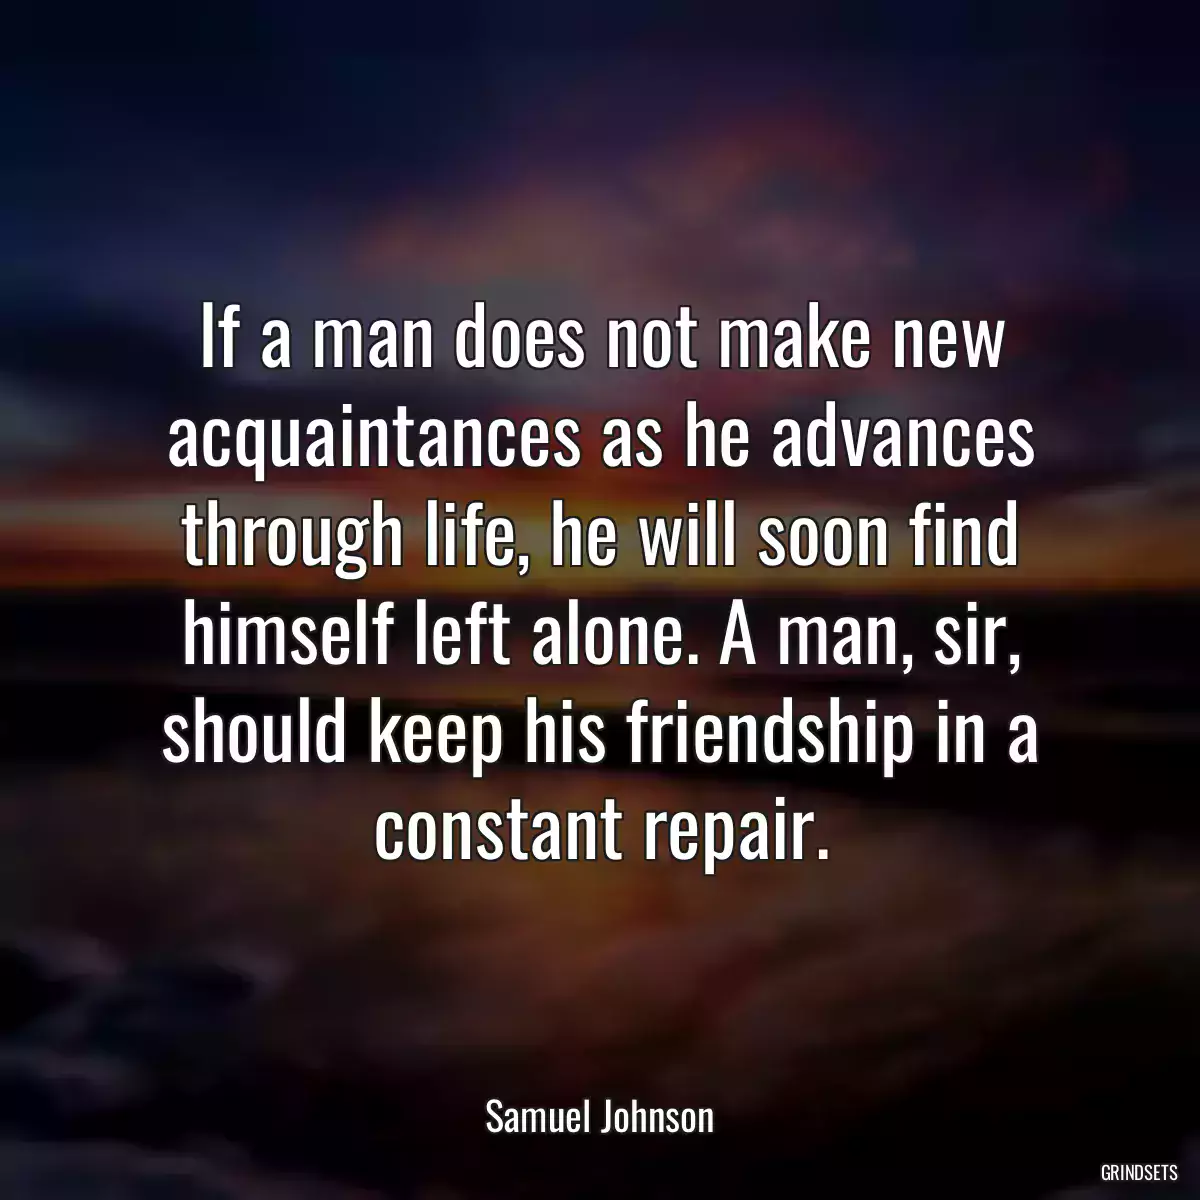 If a man does not make new acquaintances as he advances through life, he will soon find himself left alone. A man, sir, should keep his friendship in a constant repair.